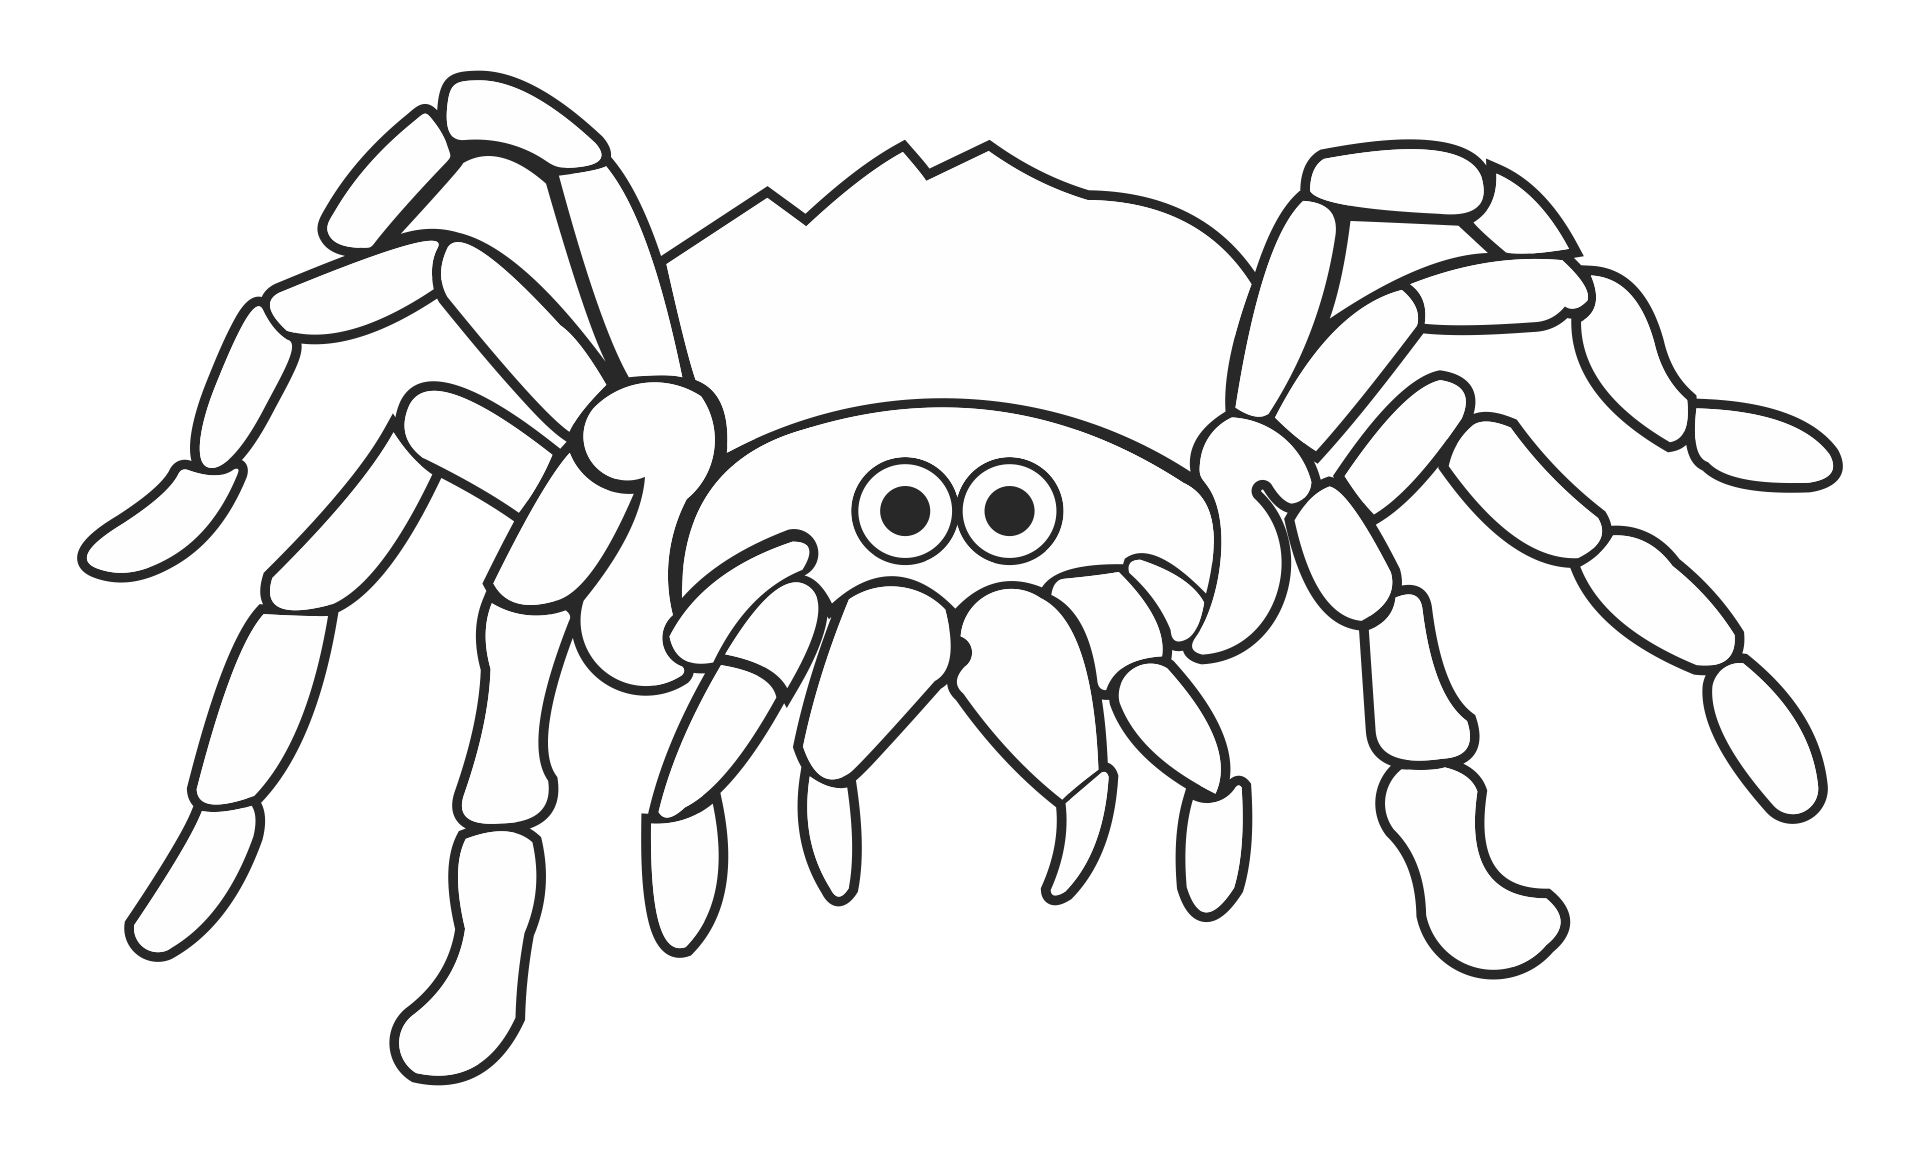 15-best-printable-halloween-spider-coloring-pages-pdf-for-free-at-printablee